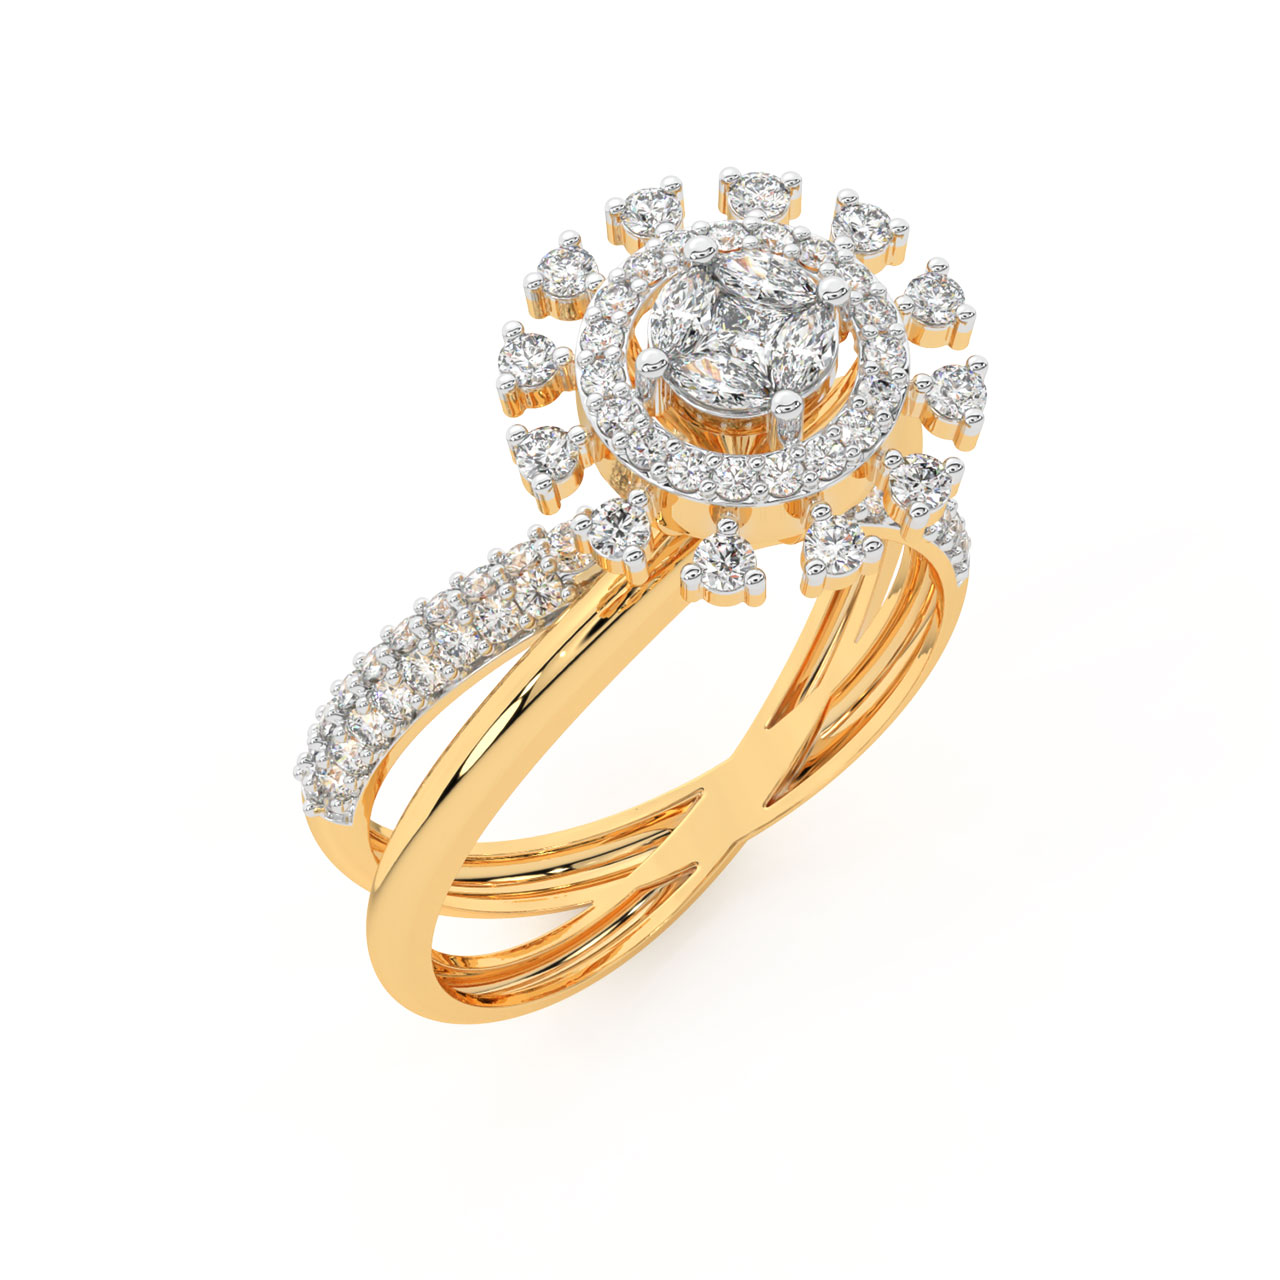 Buy Lily Round Diamond Engagement Ring Online